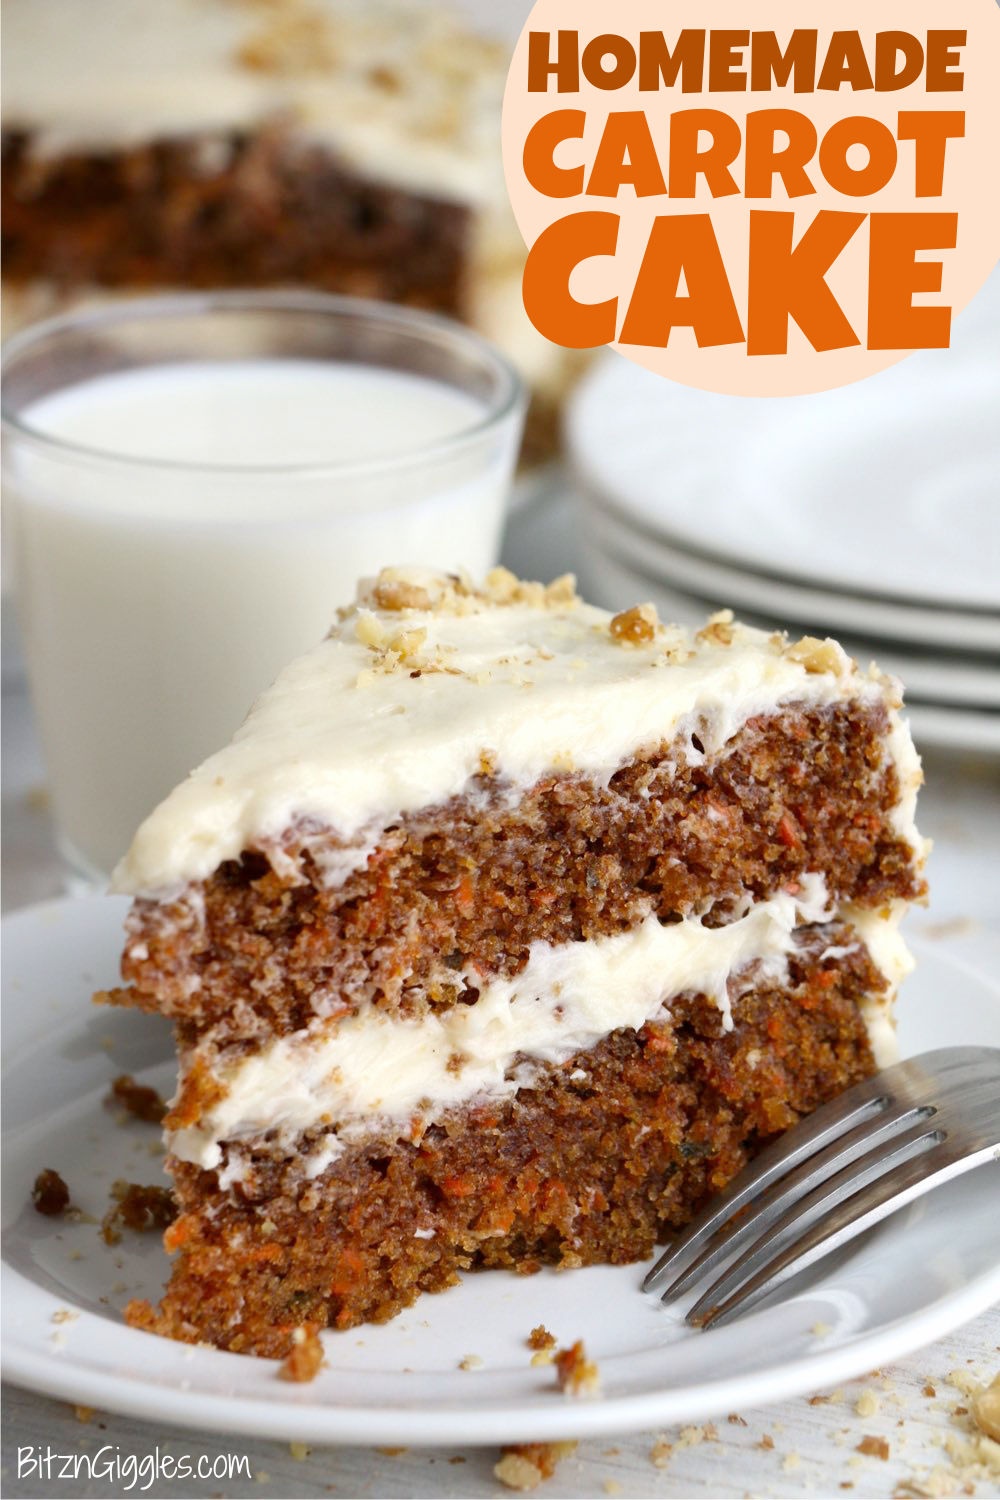 Gluten-free carrot cake with maple cream cheese frosting recipe